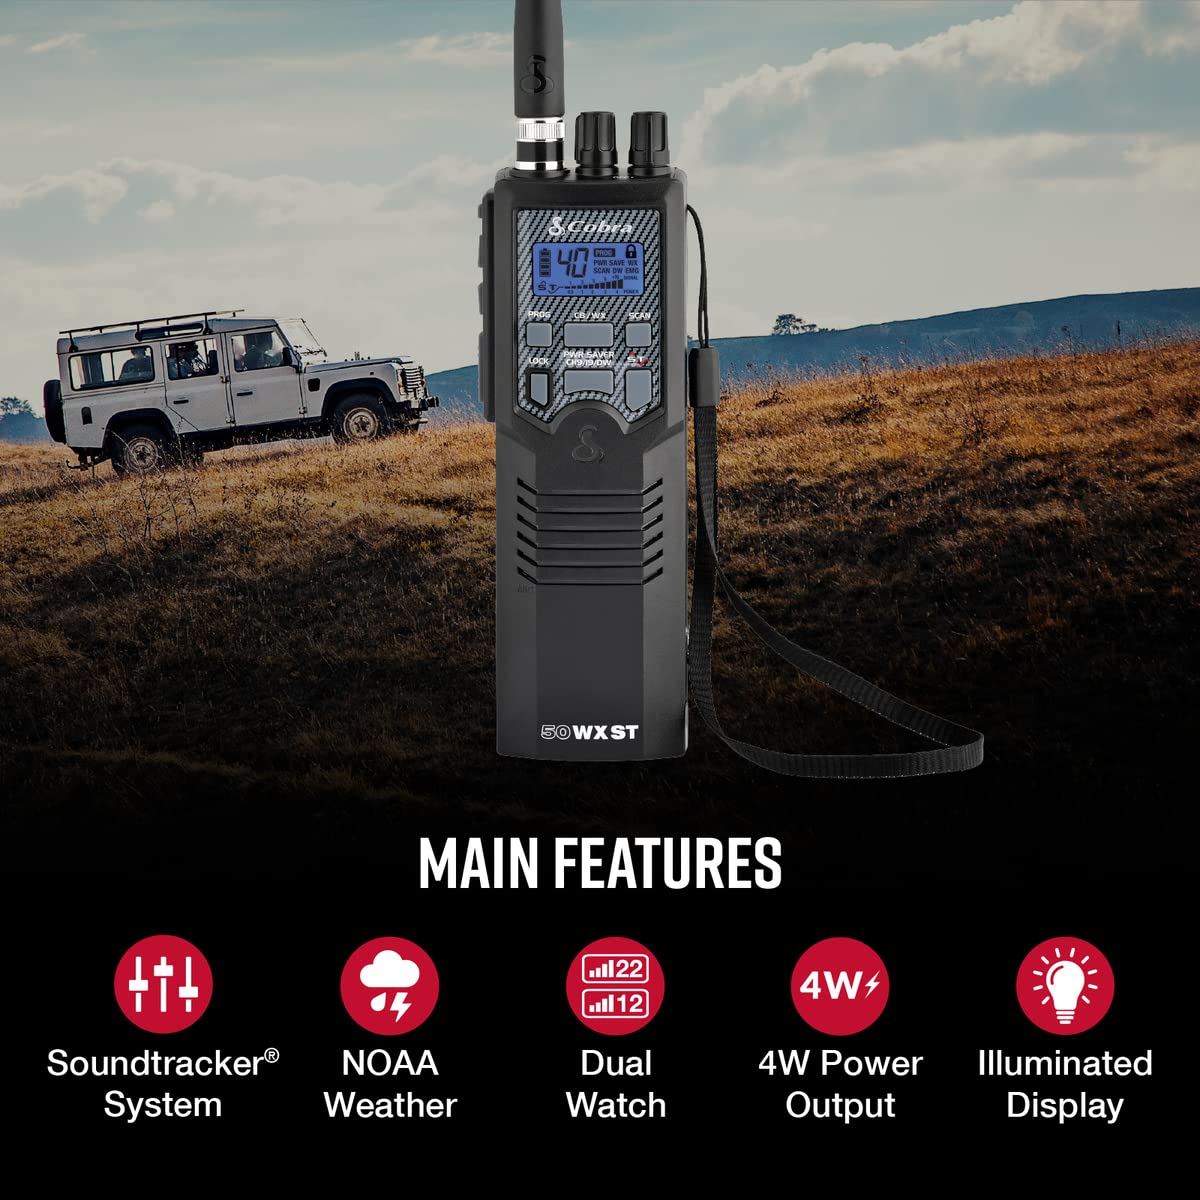 Cobra HH50WXST Handheld CB Radio - Emergency Radio with Access to Full 40 Channels and NOAA Alerts, Earphone Jack, 4 Watt Power Output, Noise Reduction and Dual Channel Monitoring, Black